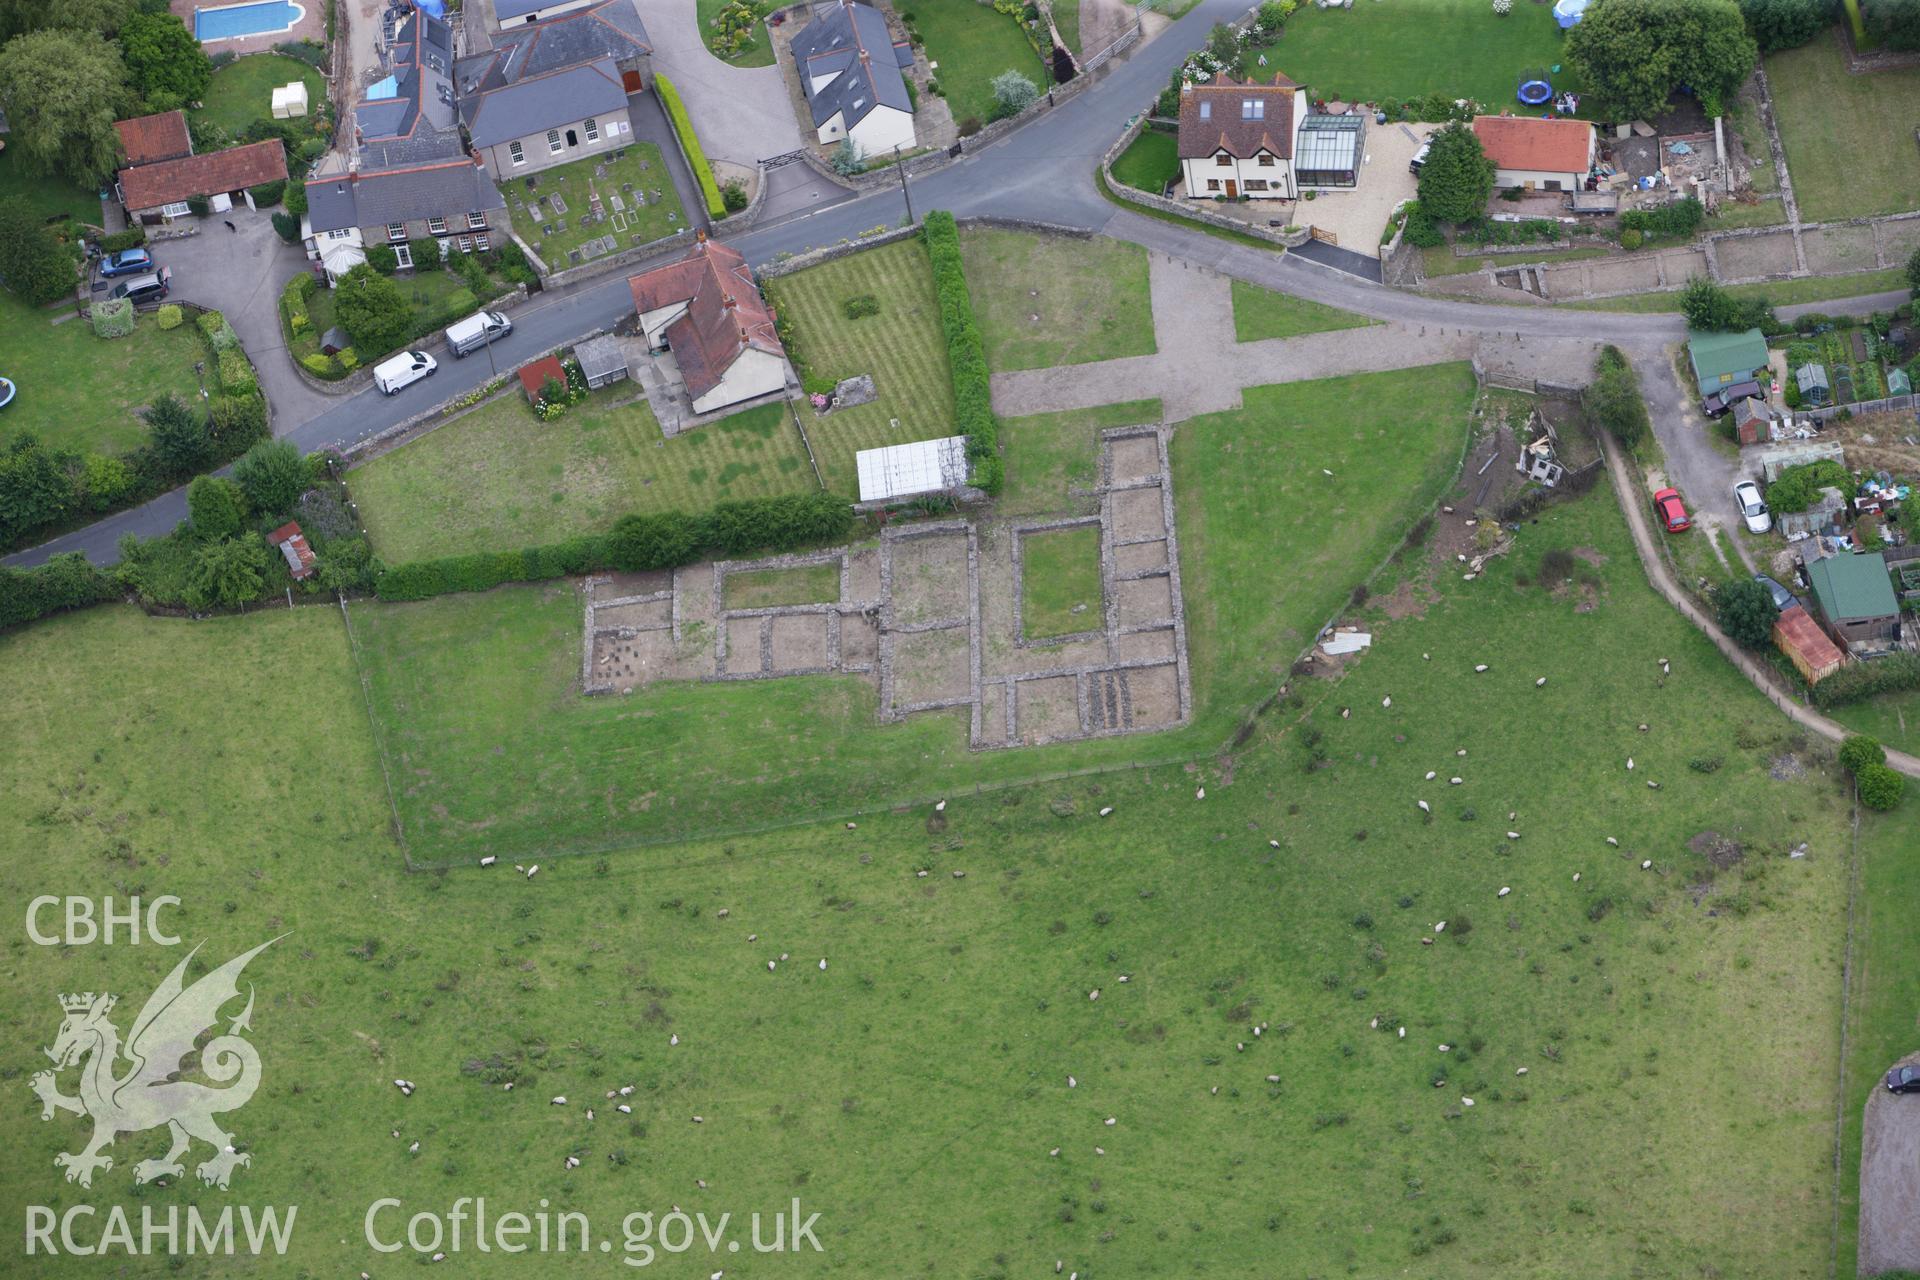 RCAHMW colour oblique aerial photograph of Caerwent Roman City (Venta Silurum). Taken on 09 July 2009 by Toby Driver